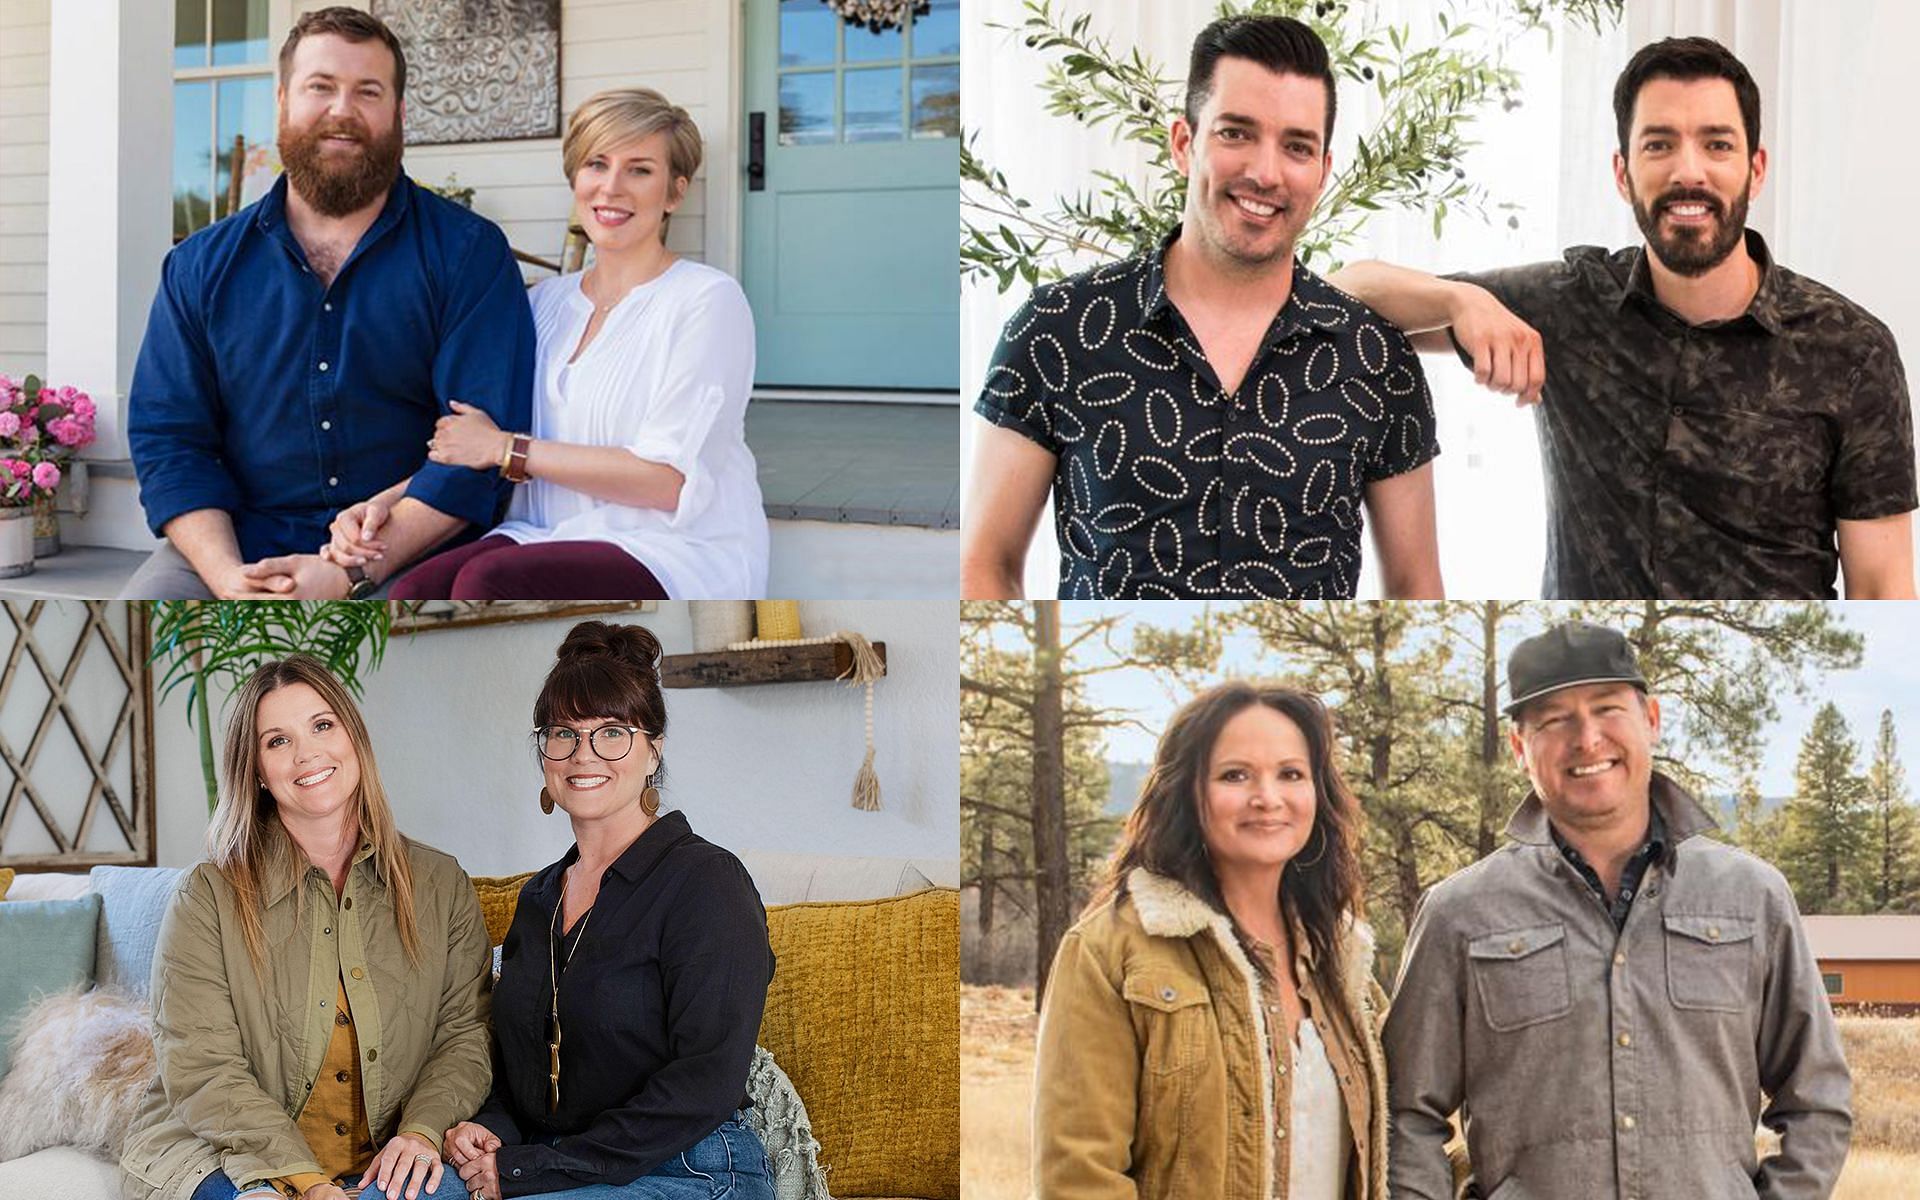 4 HGTV shows slated for April 2022 release